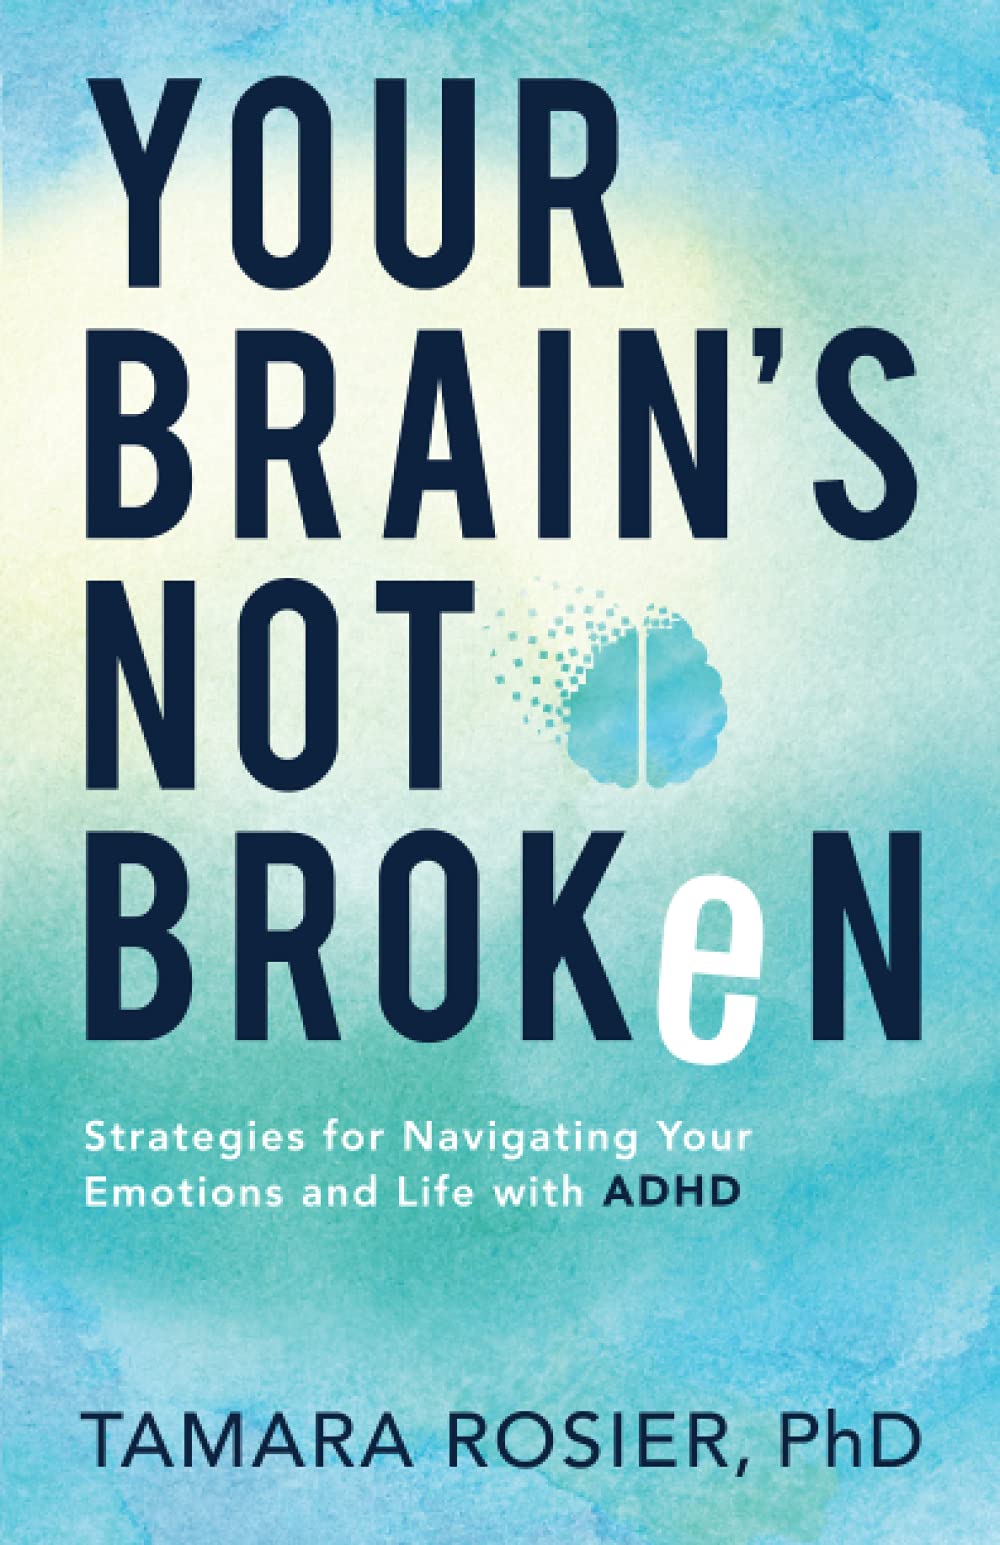 Your Brain’s Not Broken: Strategies for Navigating Your Life and Emotions with ADHD